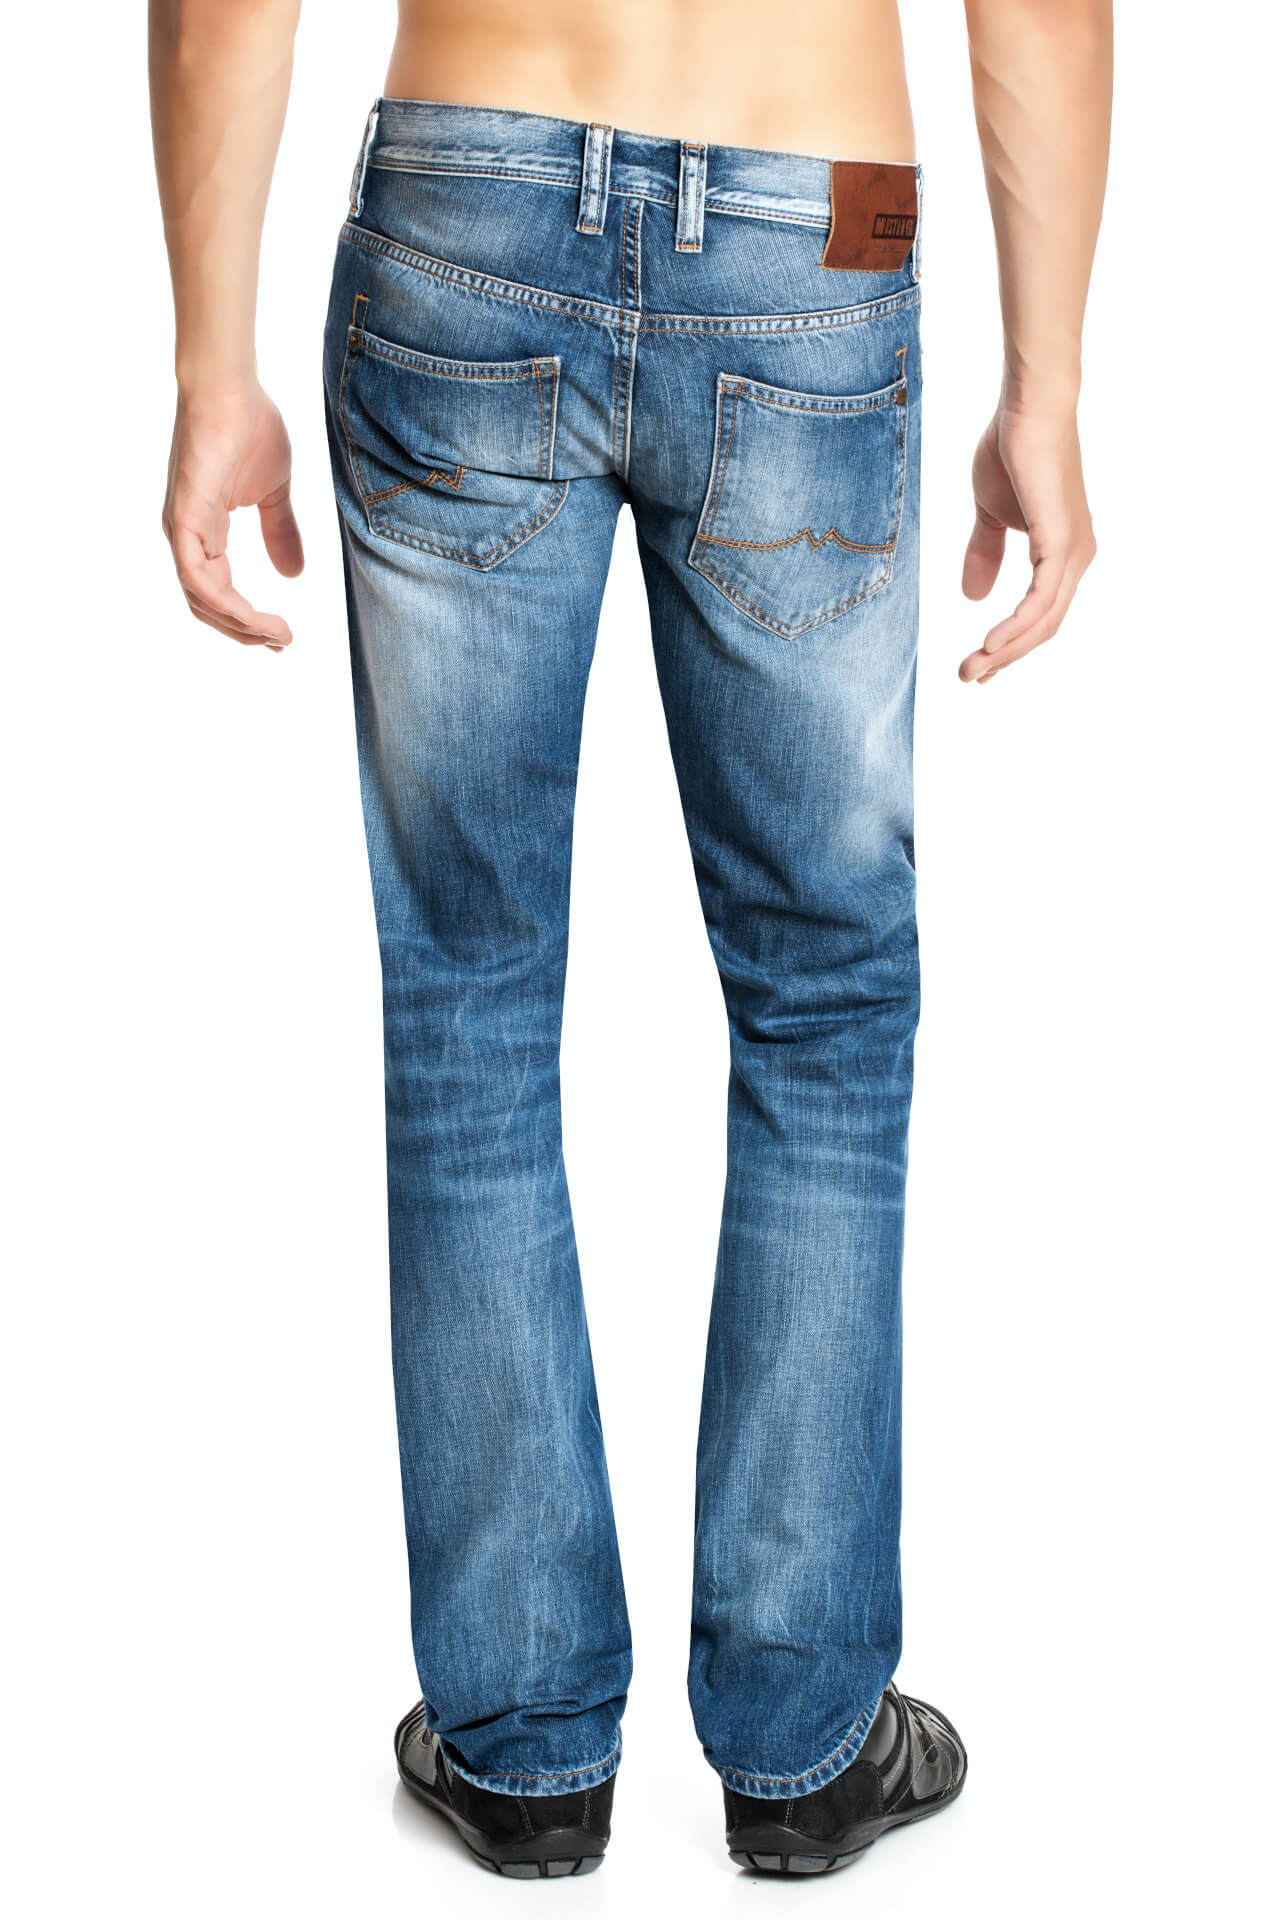 Mustang Jeans Oregon Straight